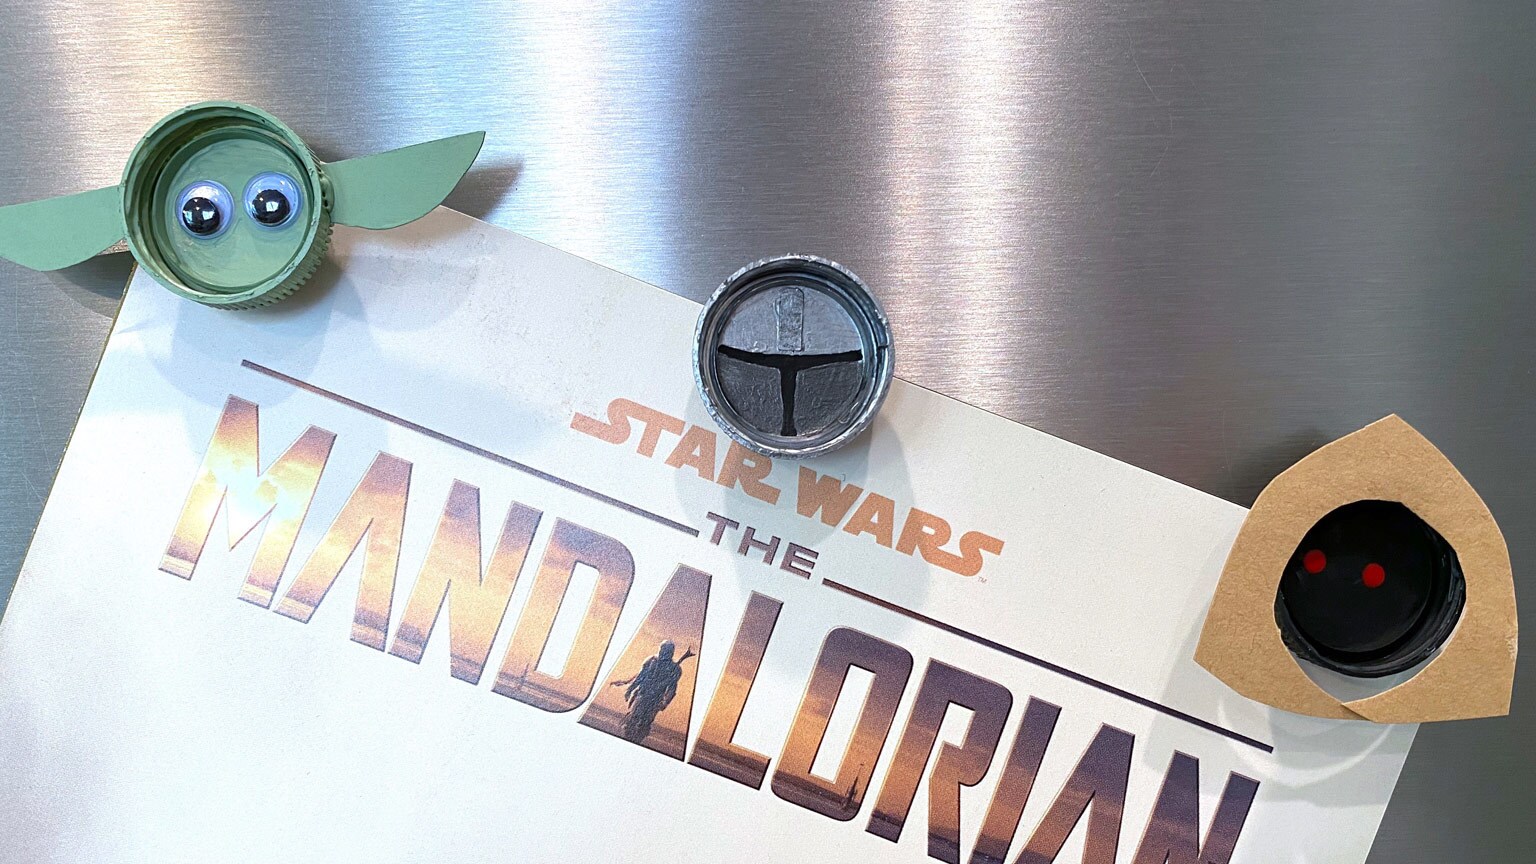 Fjord Cumulatief ambulance This is the Way to Make Mandalorian Magnets | StarWars.com